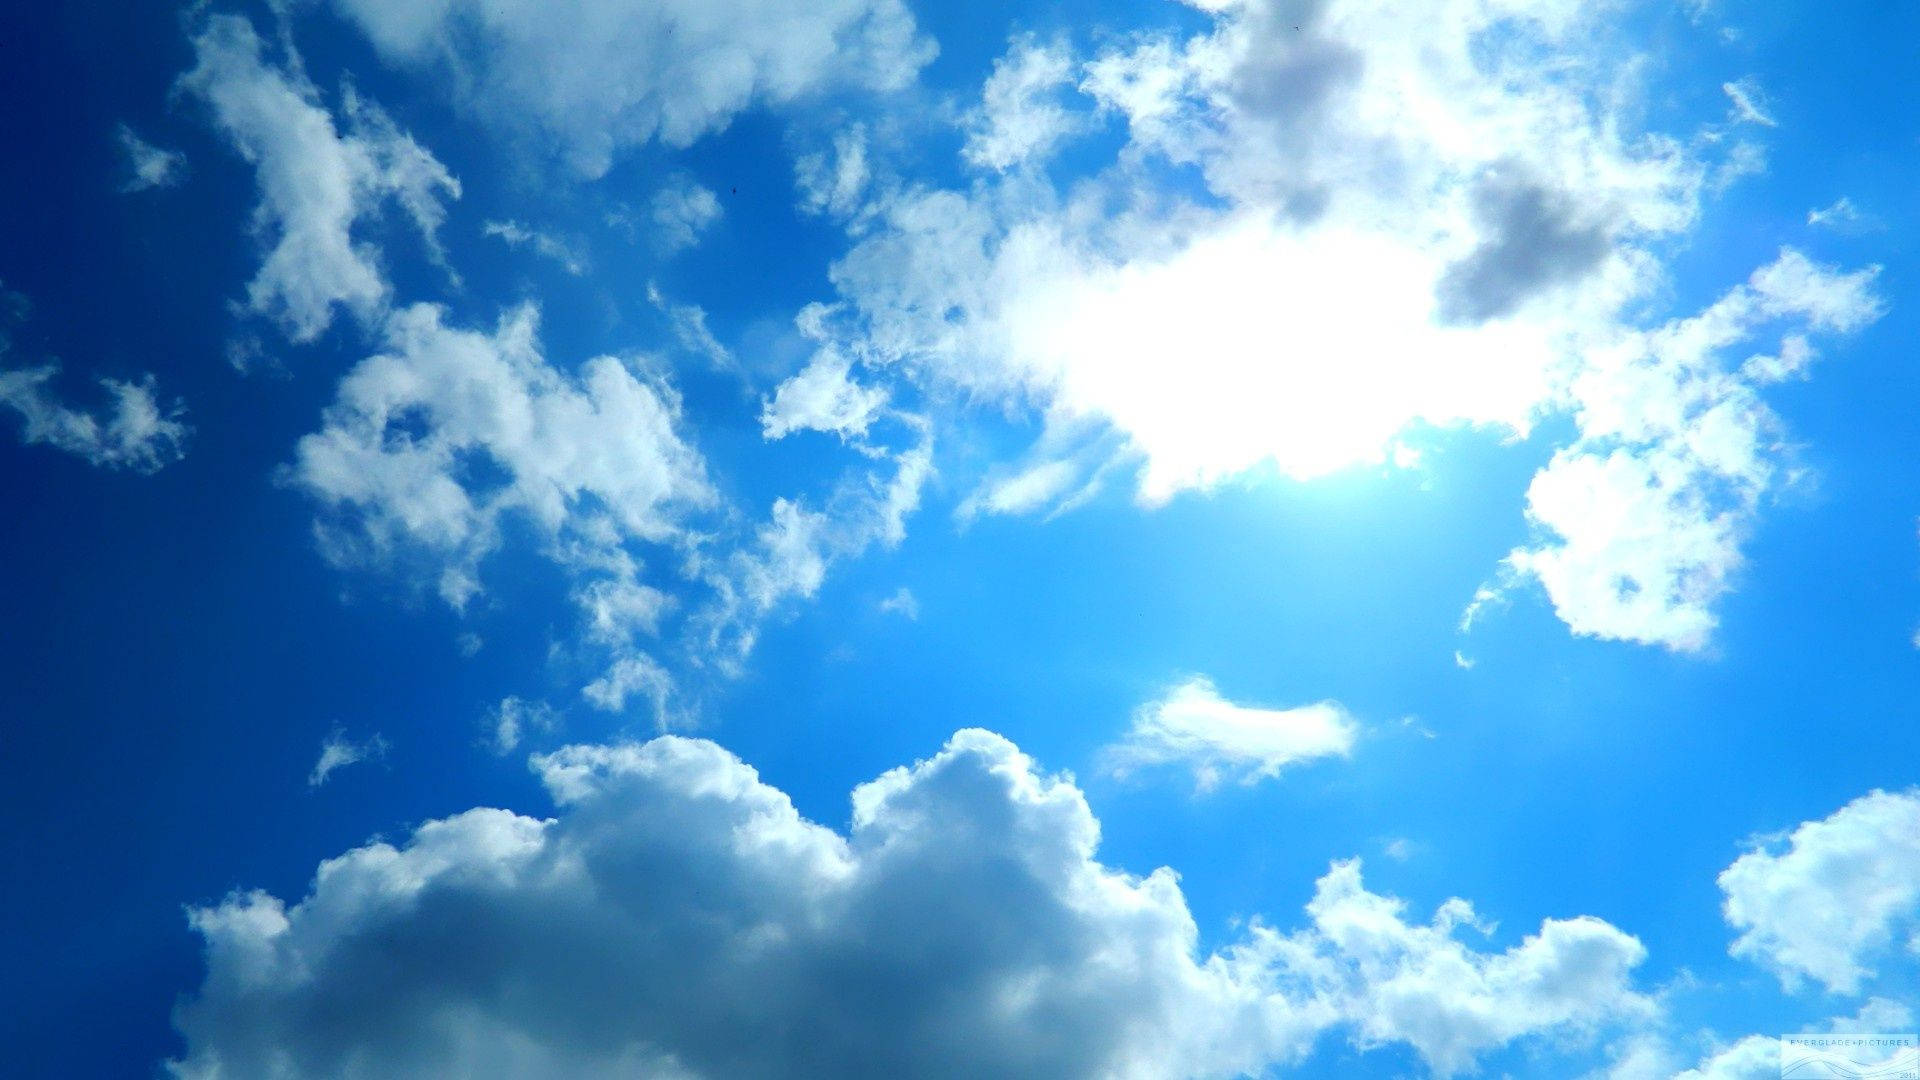 A Blue Sky With Clouds And Sun Background